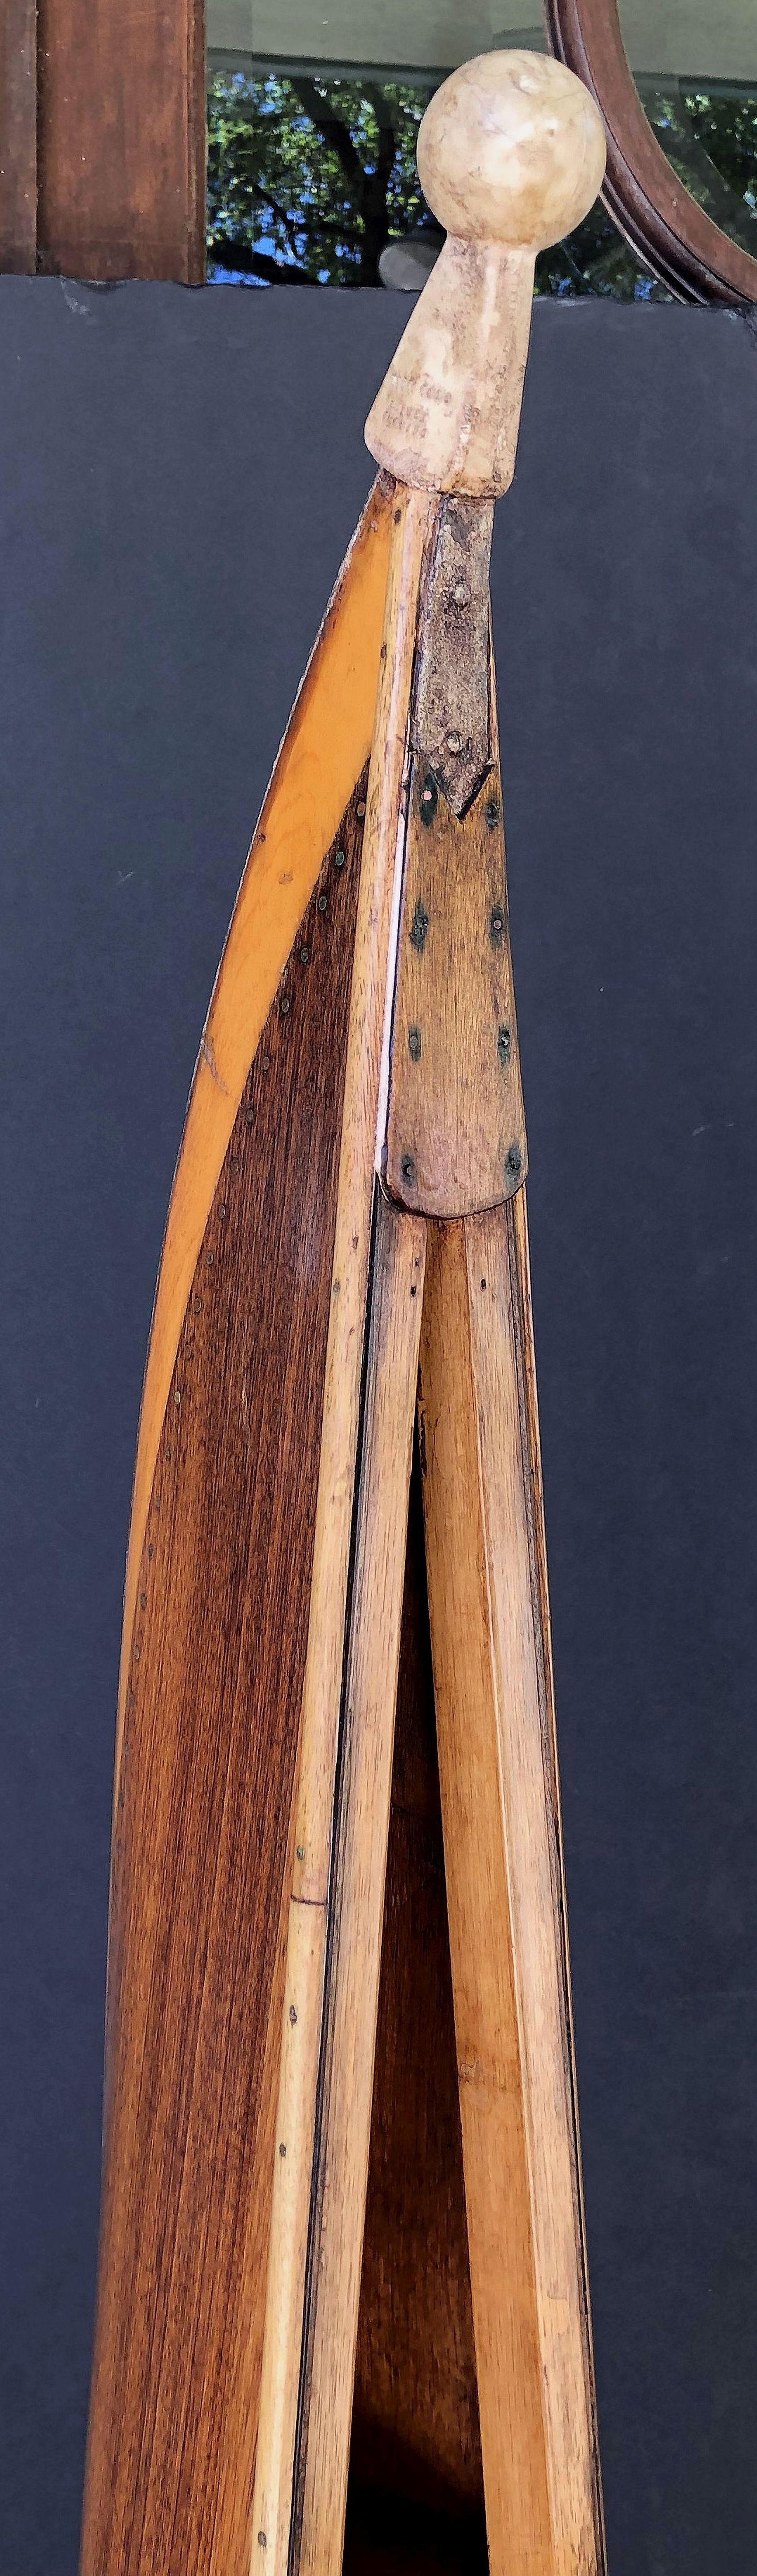 20th Century English Boat Shelf or Book Case of Mahogany in the Form of a Row Boat